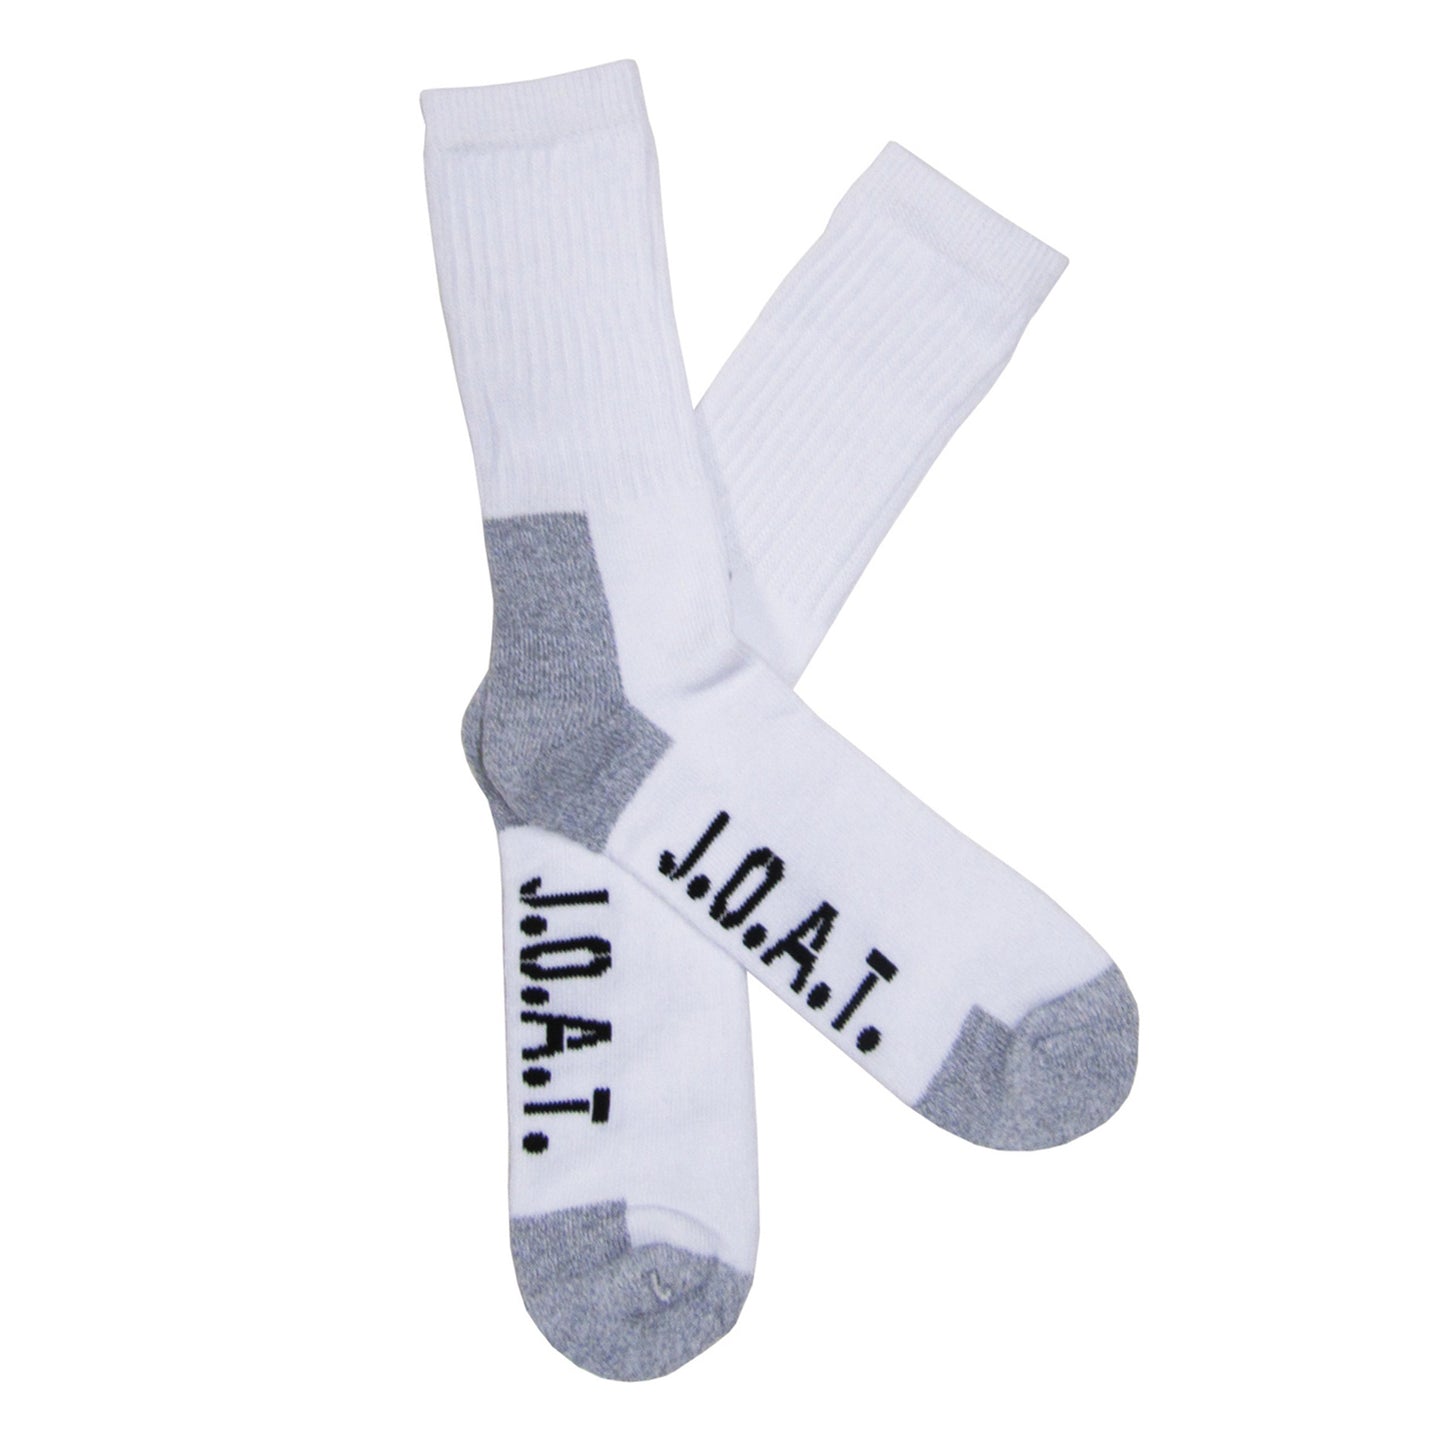 Jack of All Trades 3 Pack Cotton Action Crew Sock